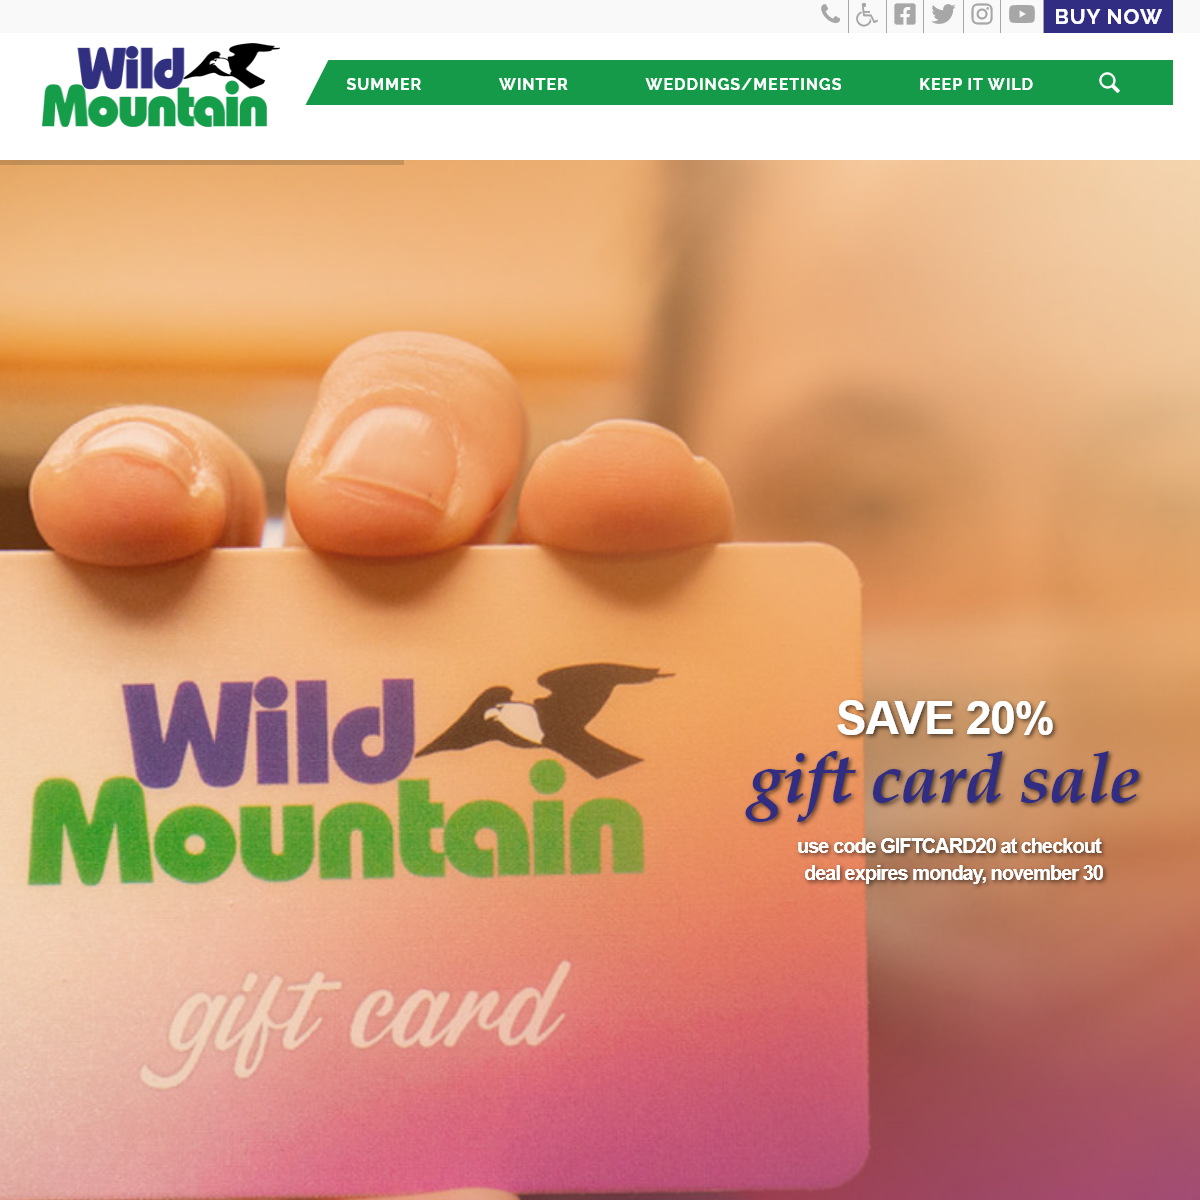 A complete backup of wildmountain.com